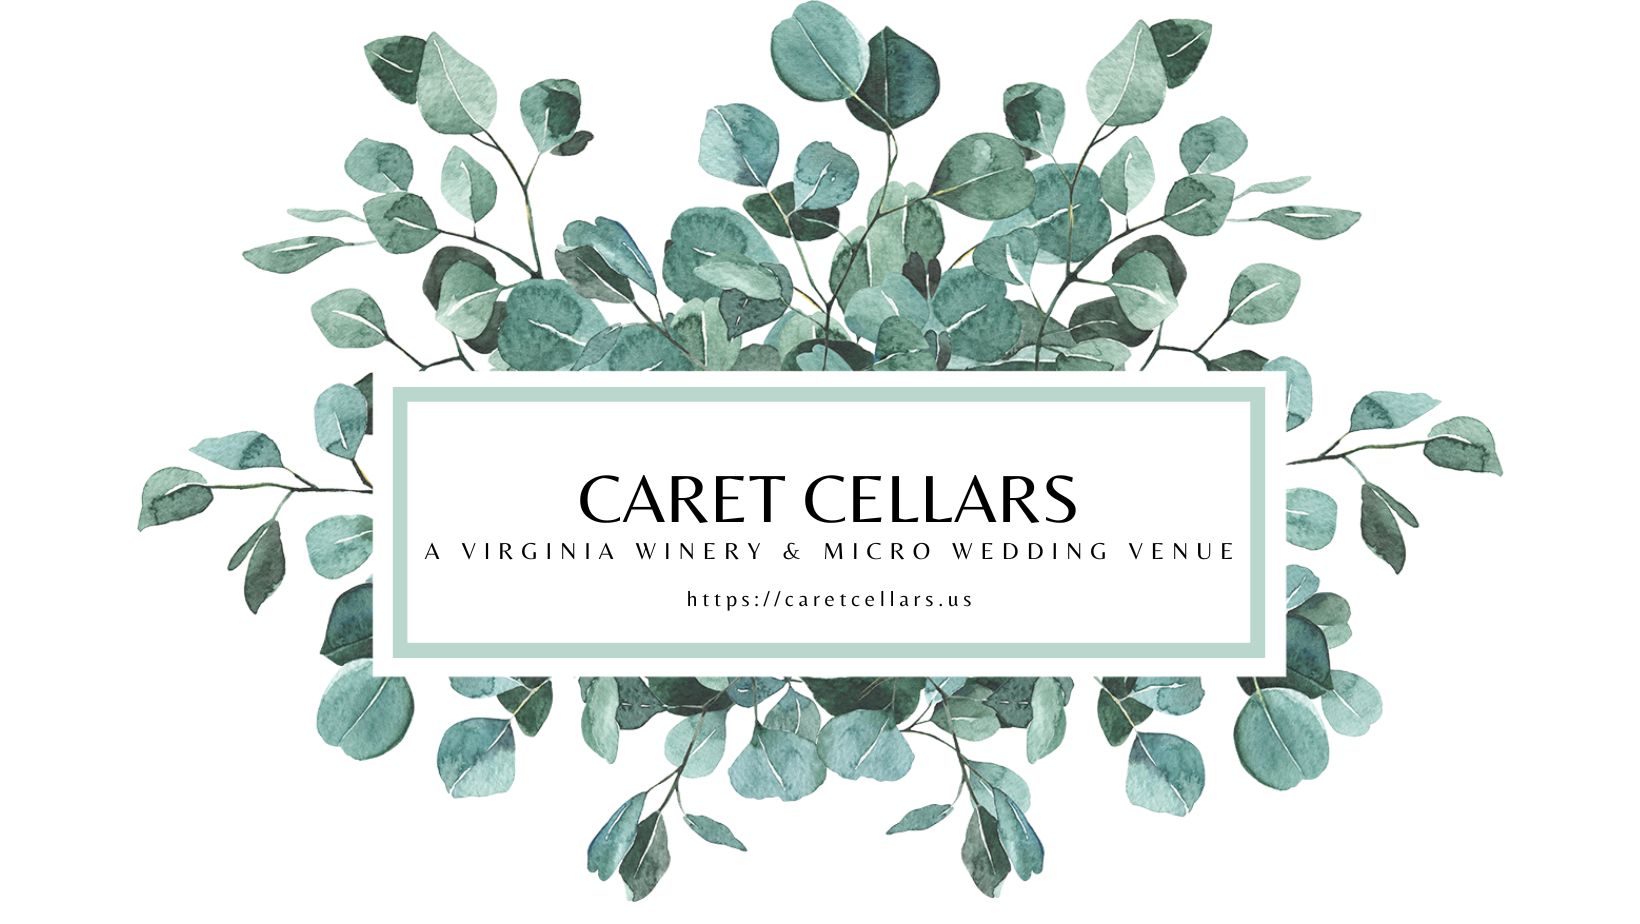 Weddings at Caret Cellars offers couples DIY and inclusive micro wedding and non traditional wedding packages at affordable prices.